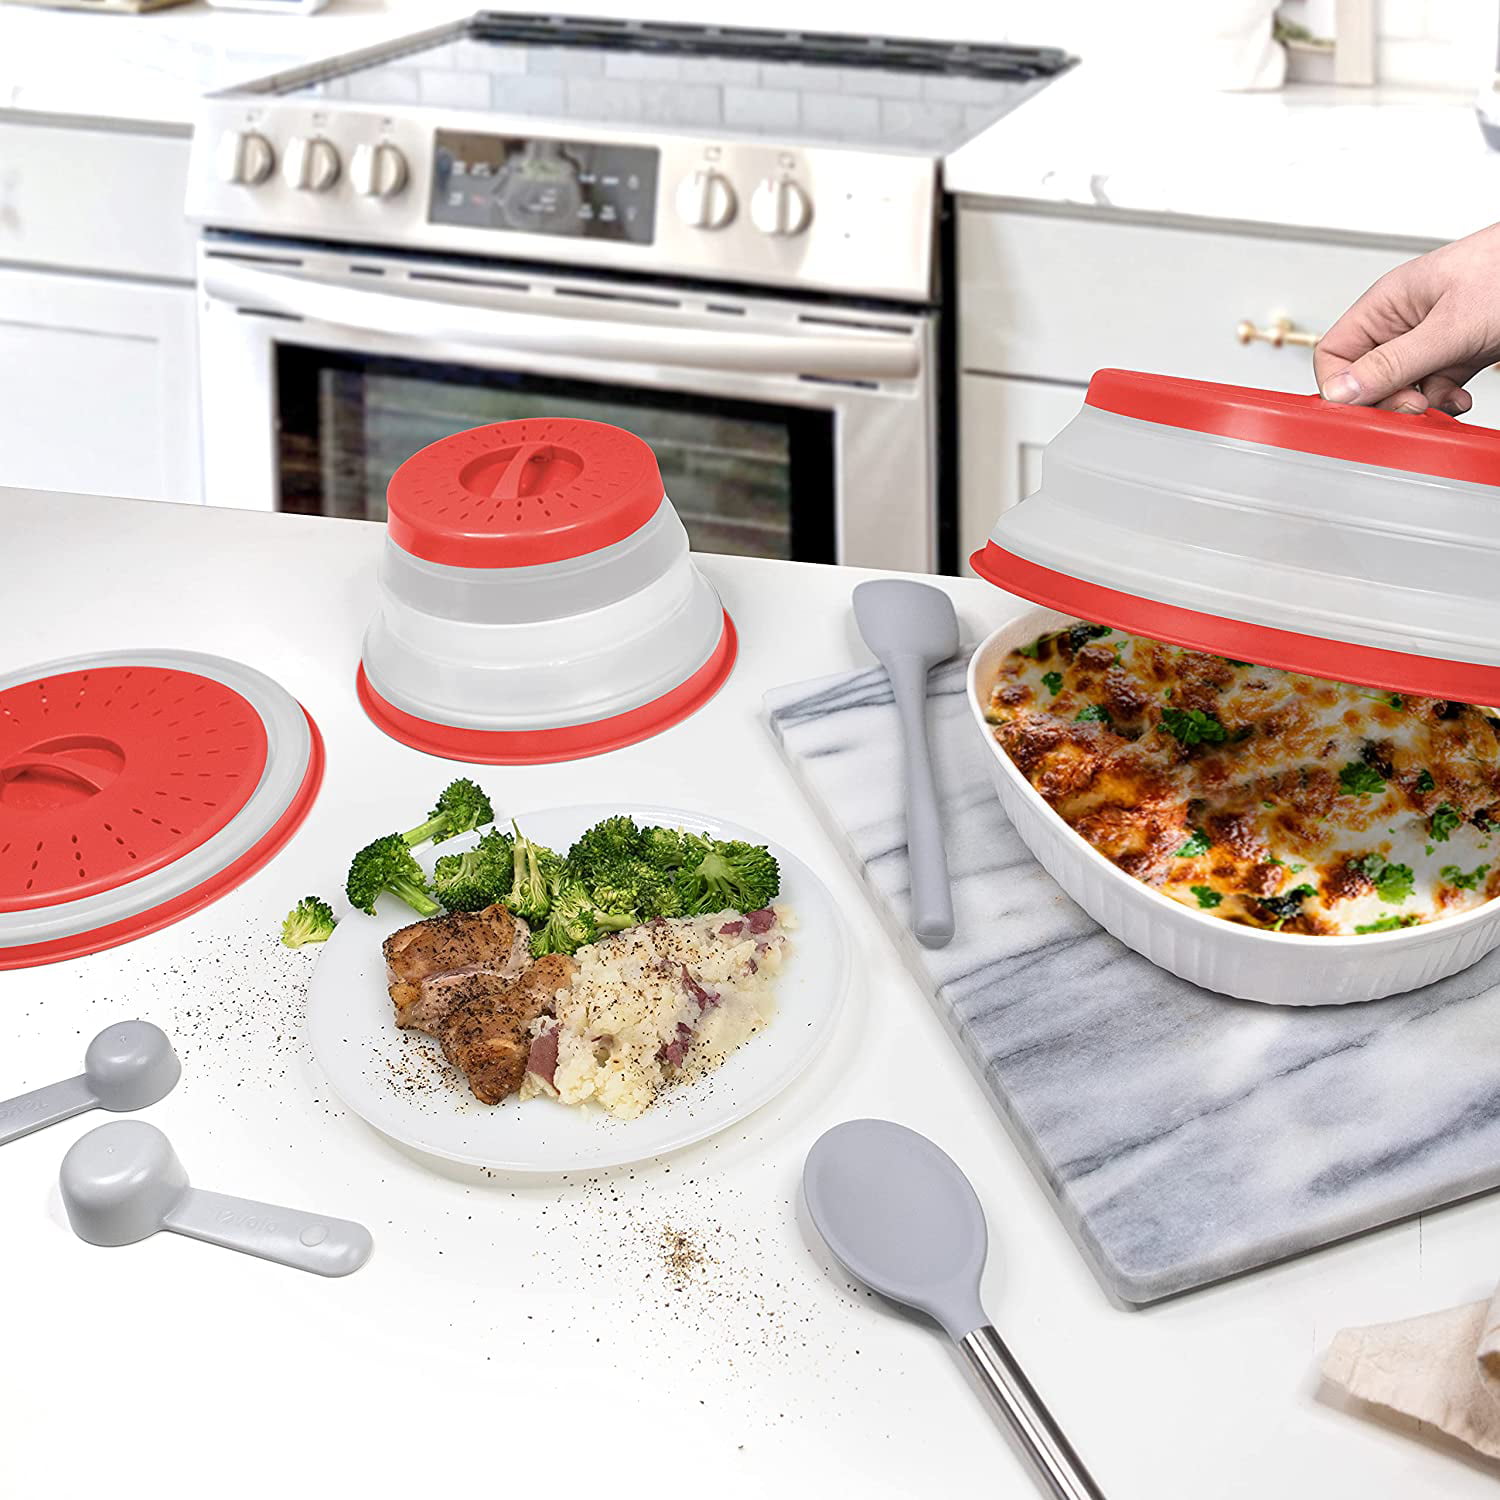 Tovolo Collapsible Microwave Food Cover - Red – Lincoln Park Emporium